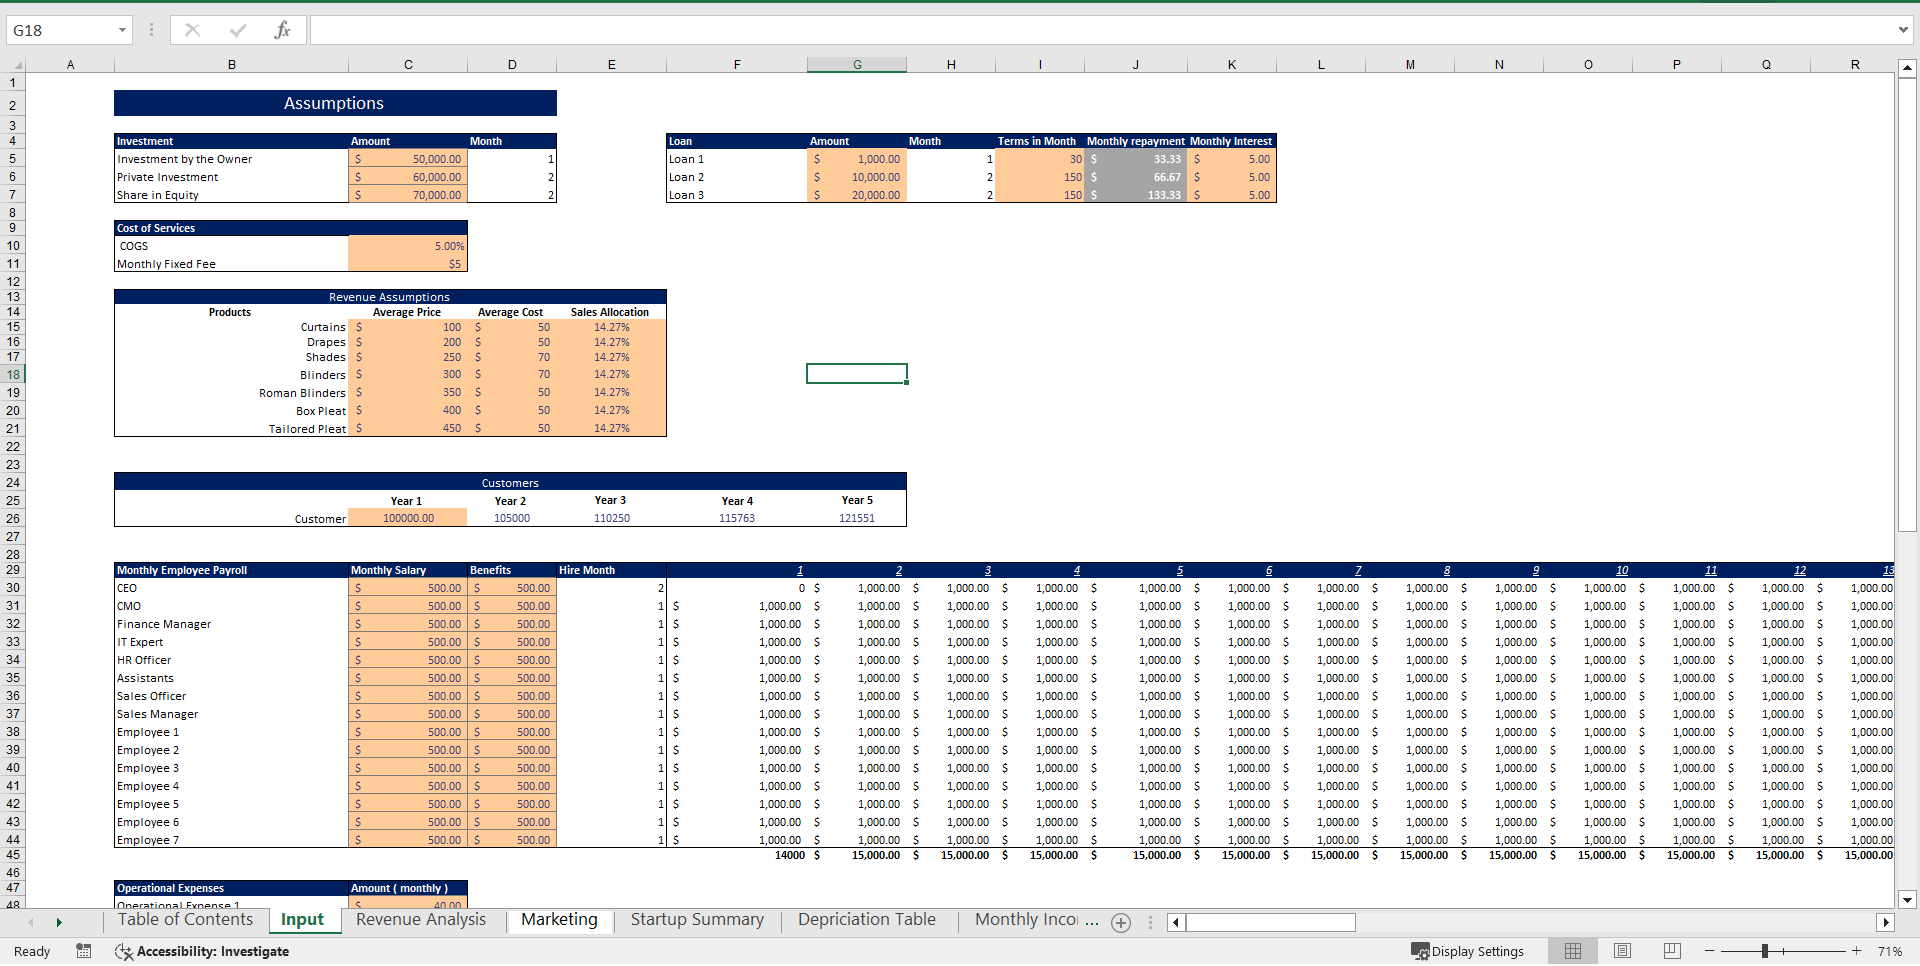 Curtain Retail Excel Financial Model Template (Excel template (XLSX)) Preview Image